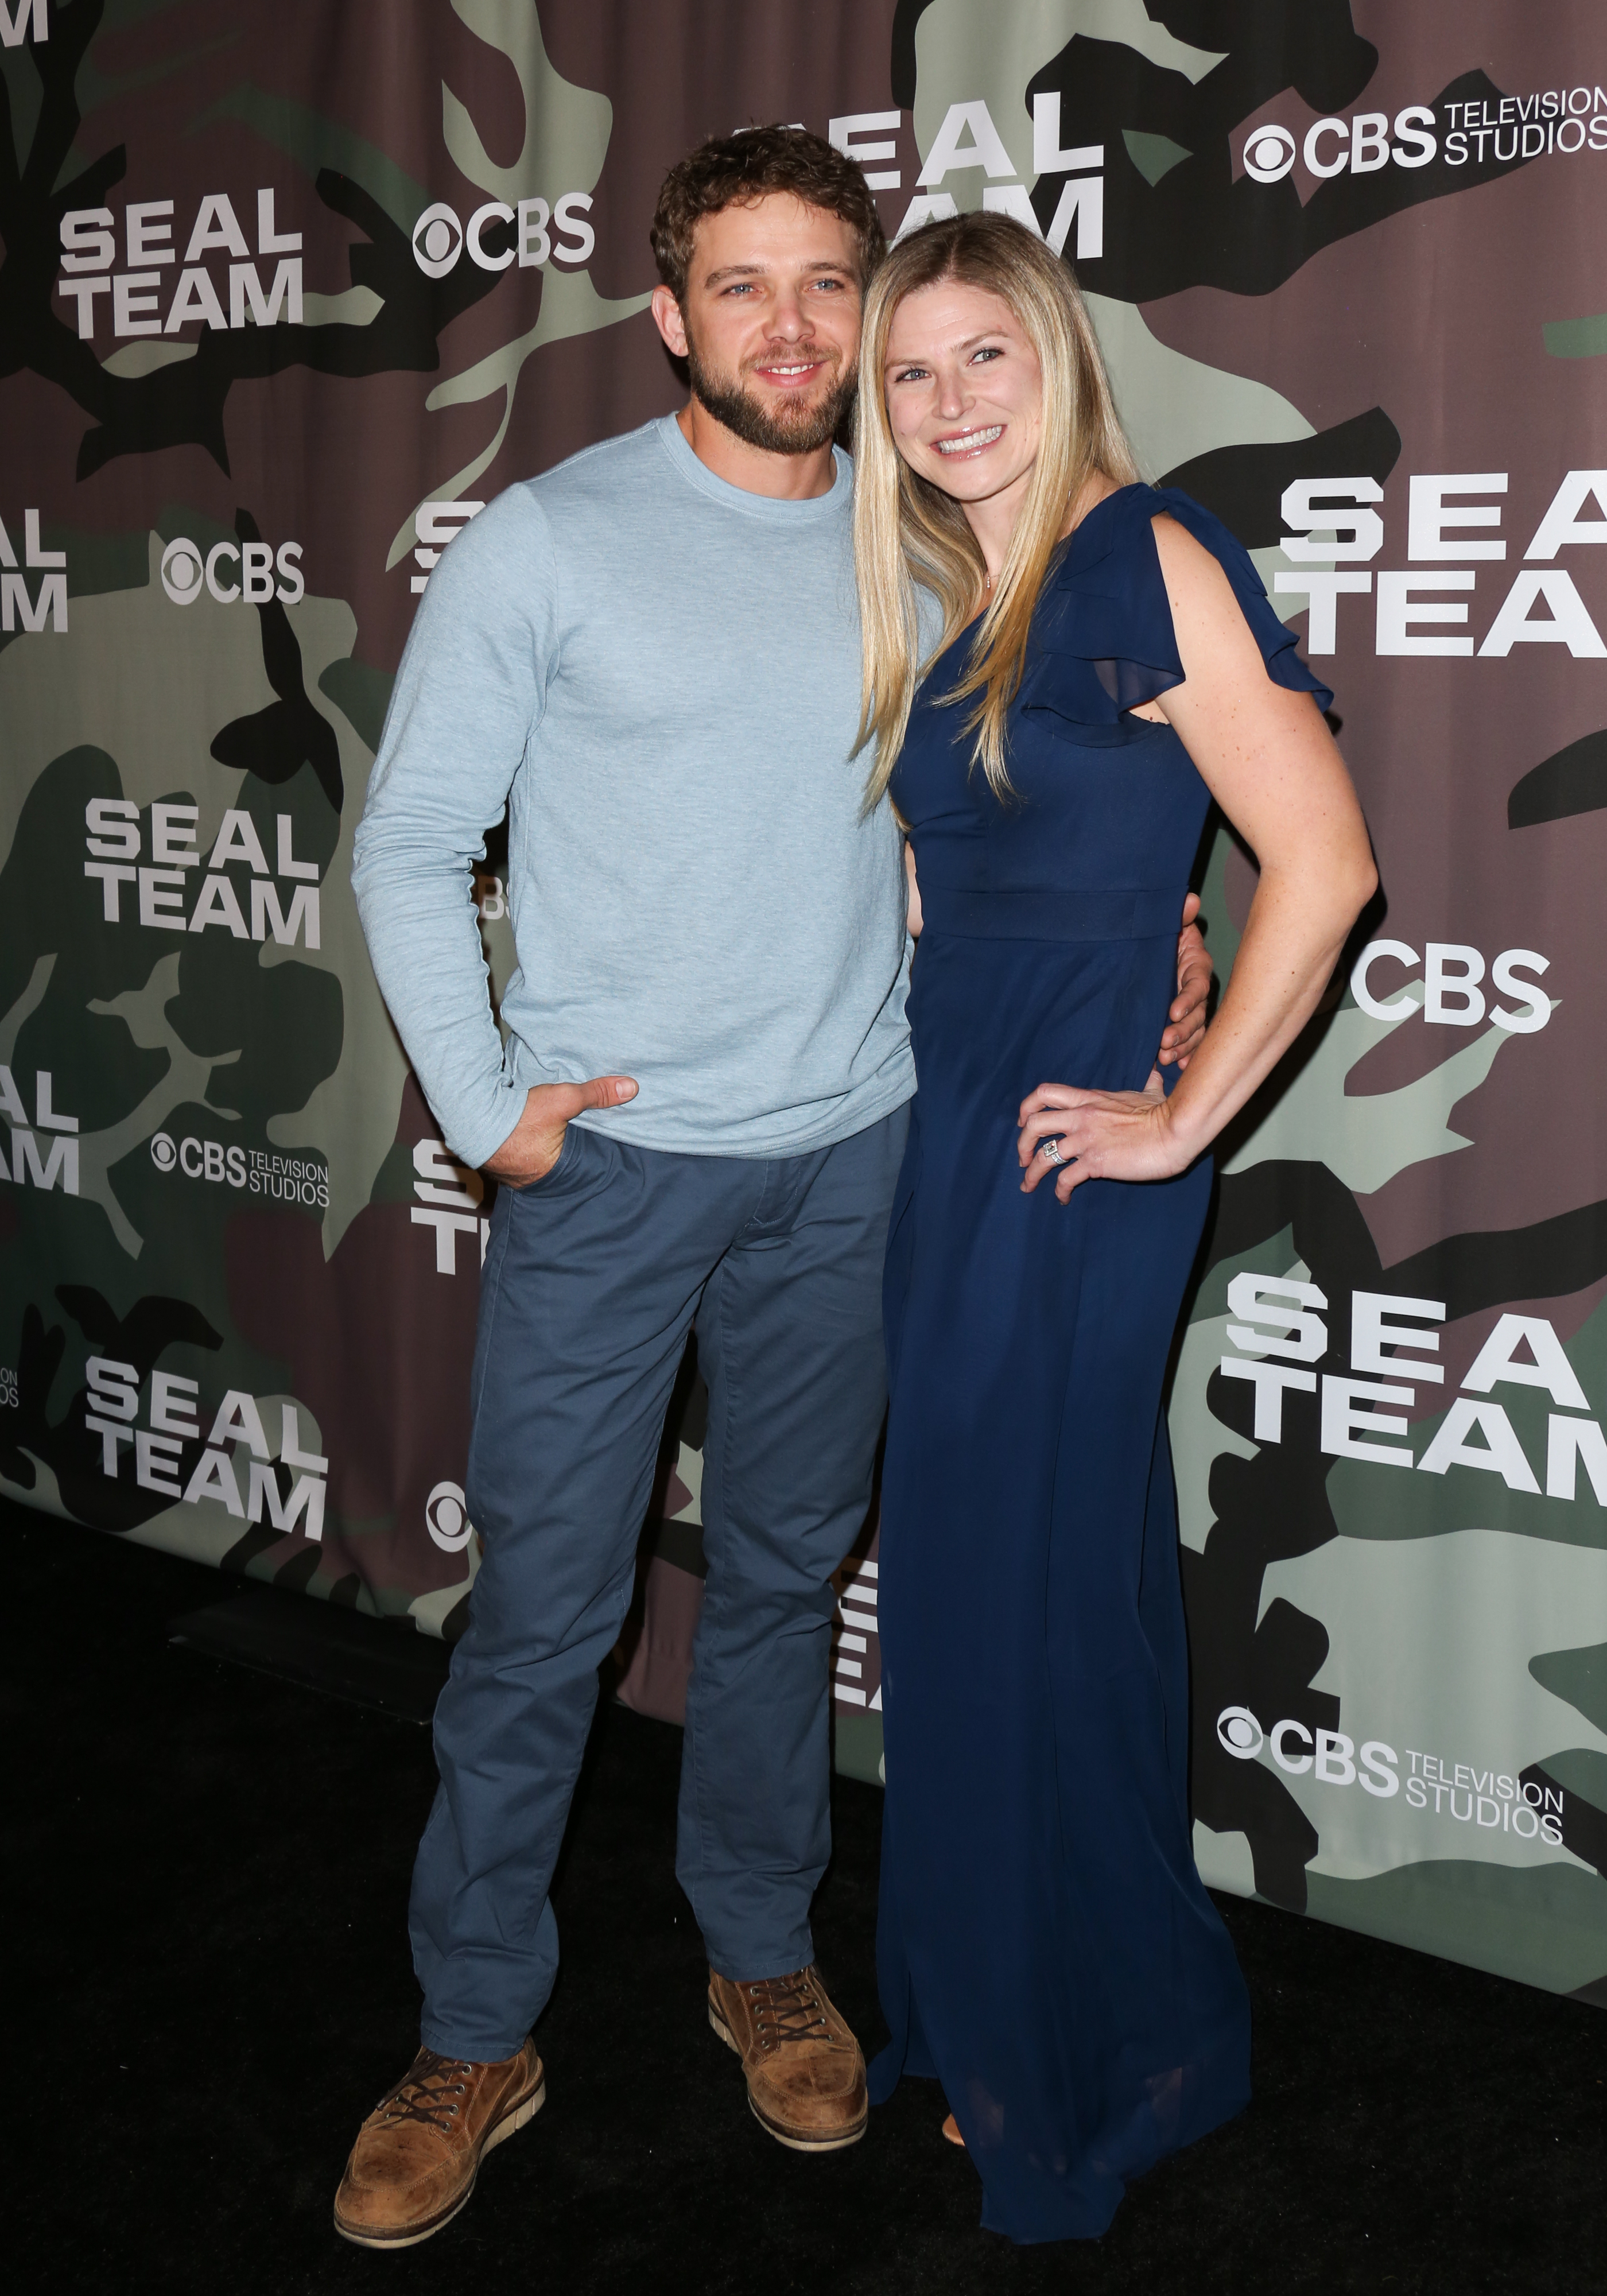 Max Thieriot and Lexy Murphy at the screening of "Seal Team" on February 25, 2020, in Hollywood, California | Source: Getty Images